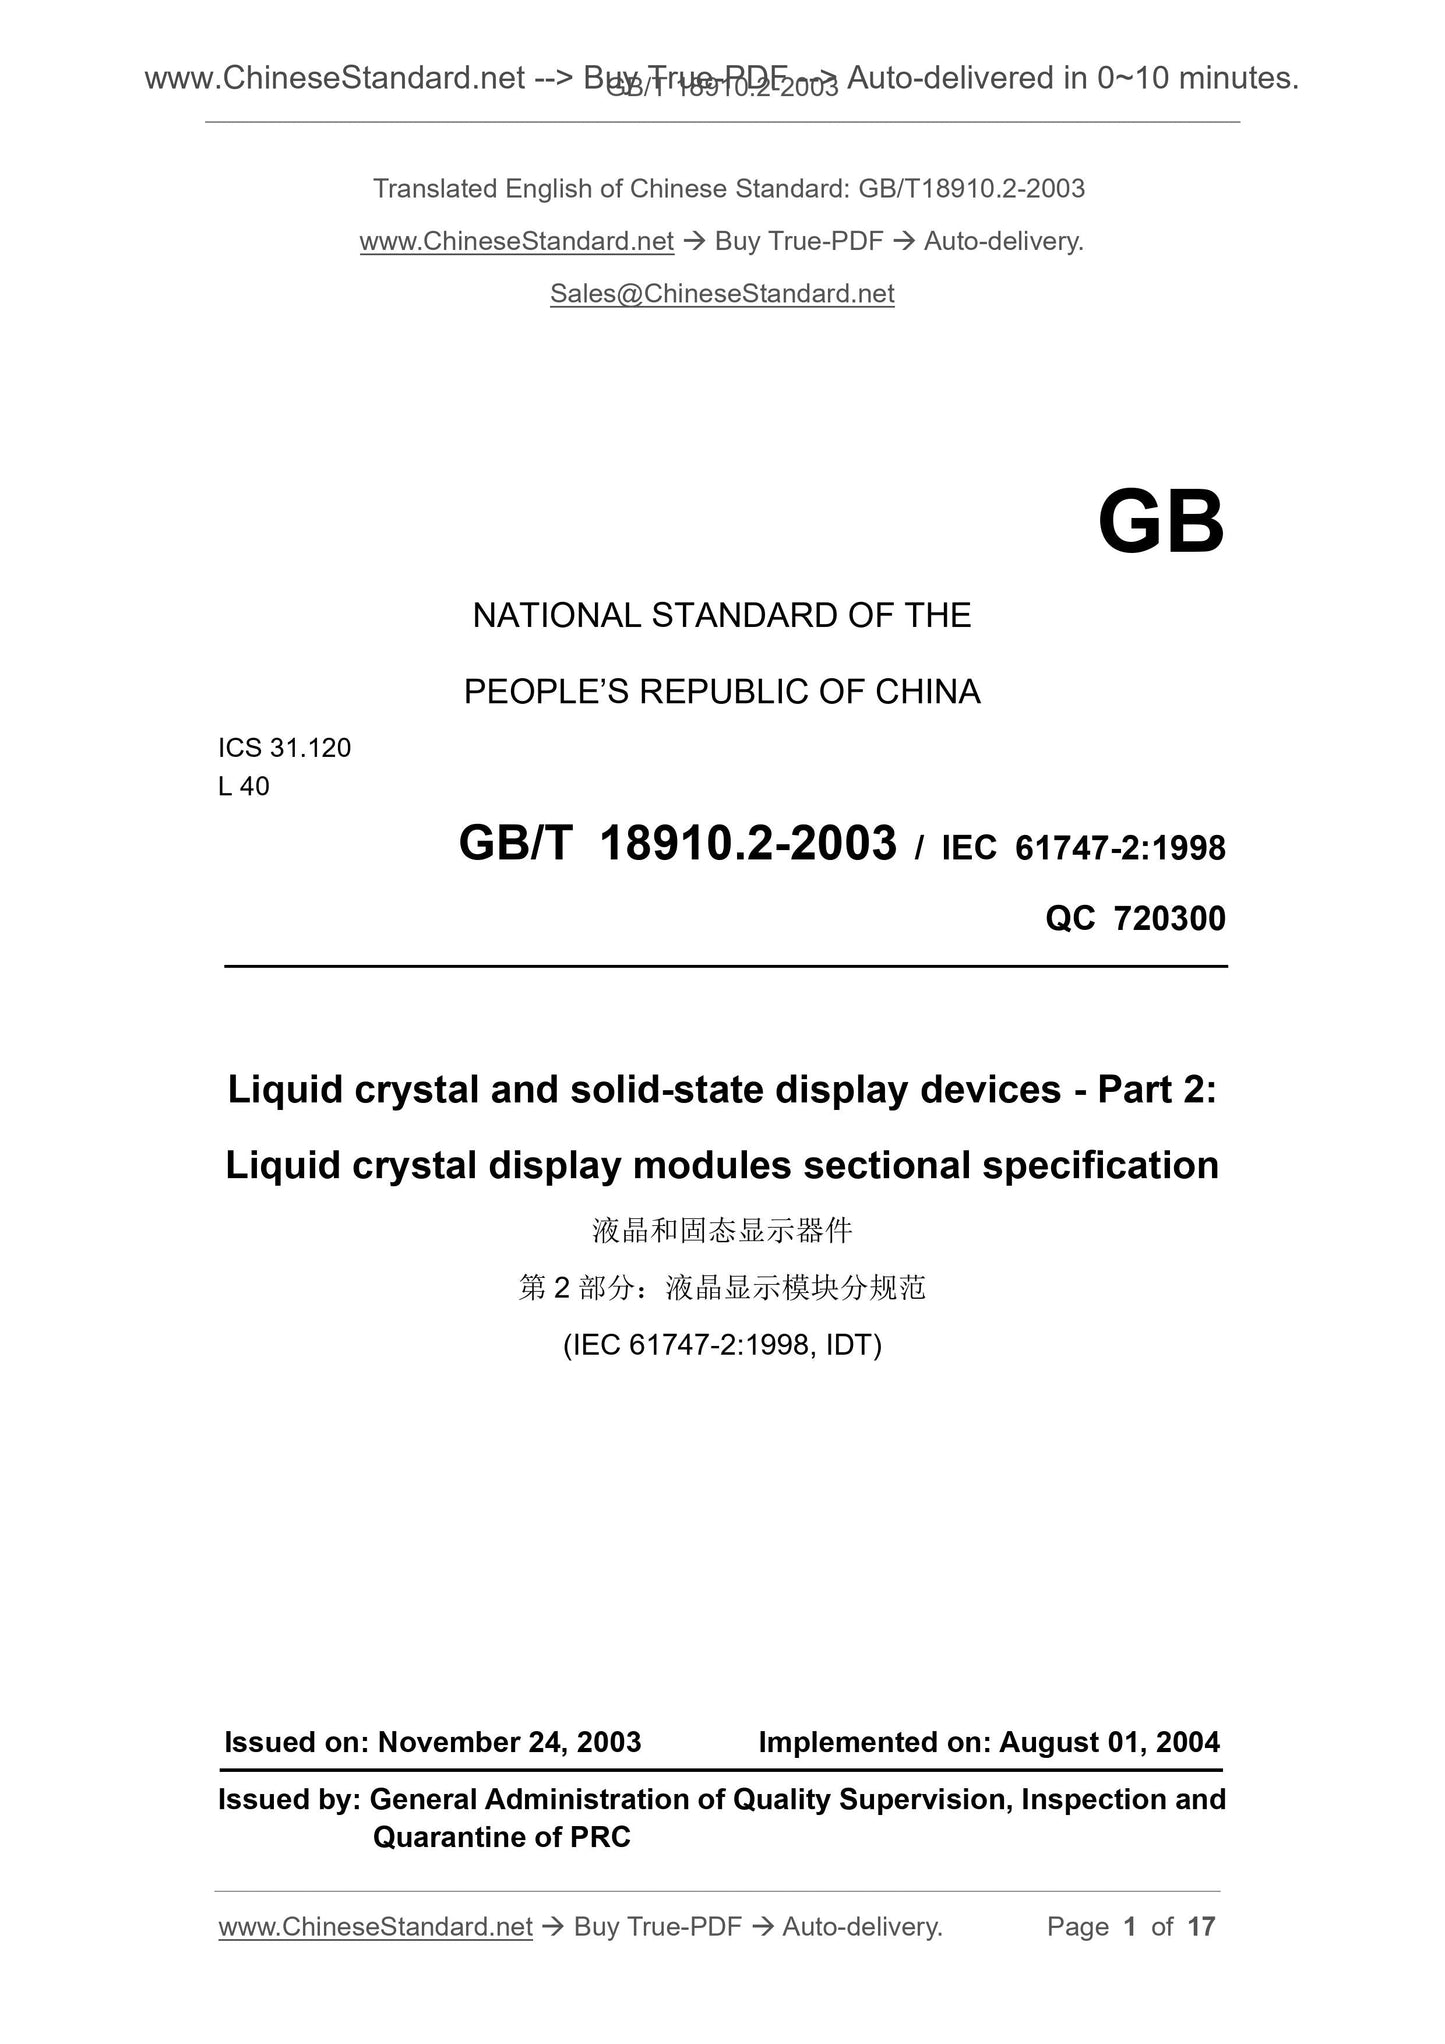 GB/T 18910.2-2003 Page 1